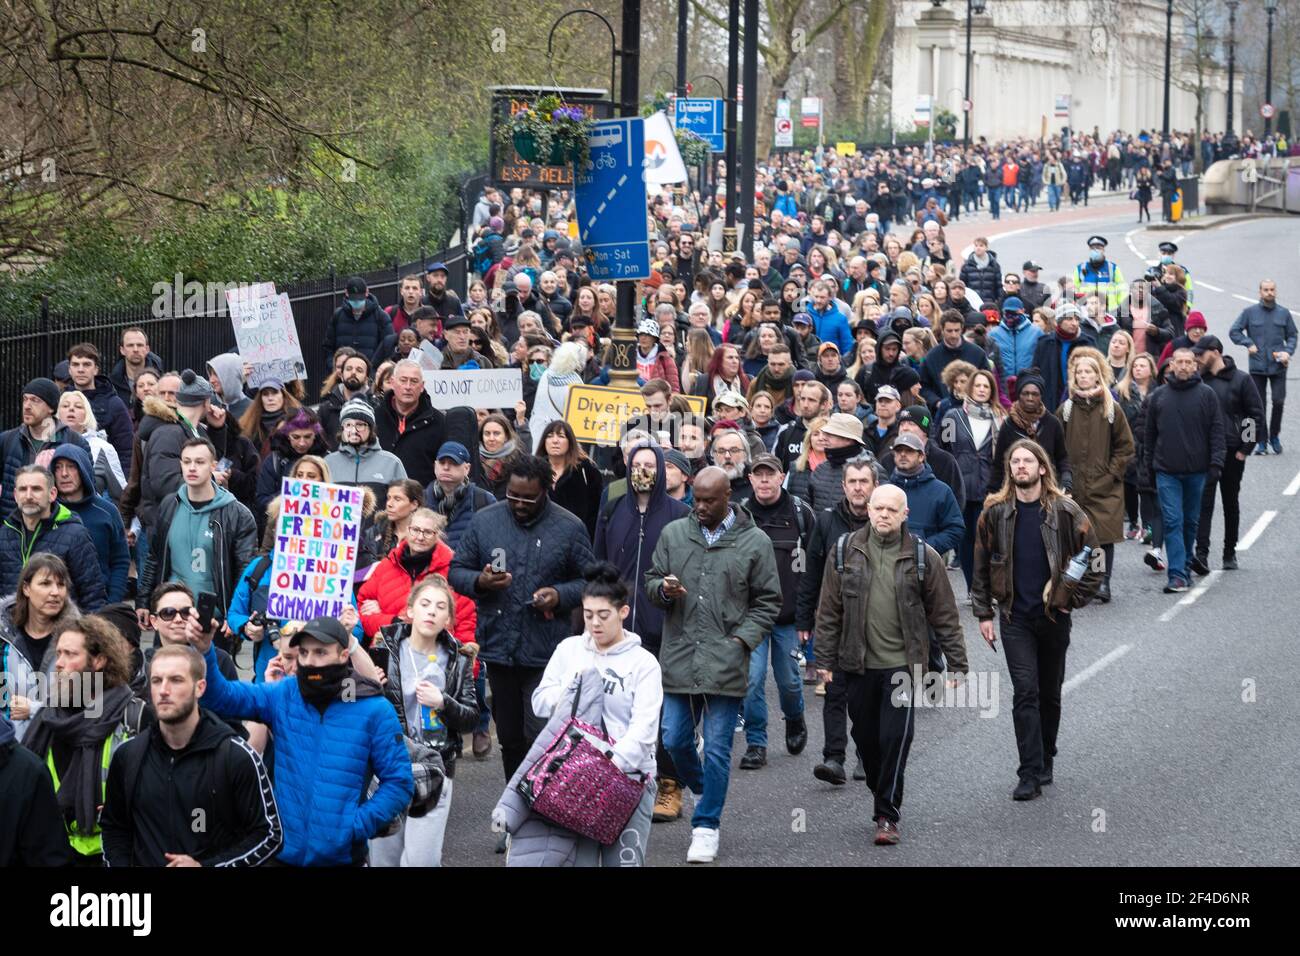 London, UK. 20th Mar, 2021. Thousands of protesters against the lockdown march down Piccadilly. A World Wide Rally For Freedom is organised a year after lockdowns were introduced. Credit: Andy Barton/Alamy Live News Stock Photo